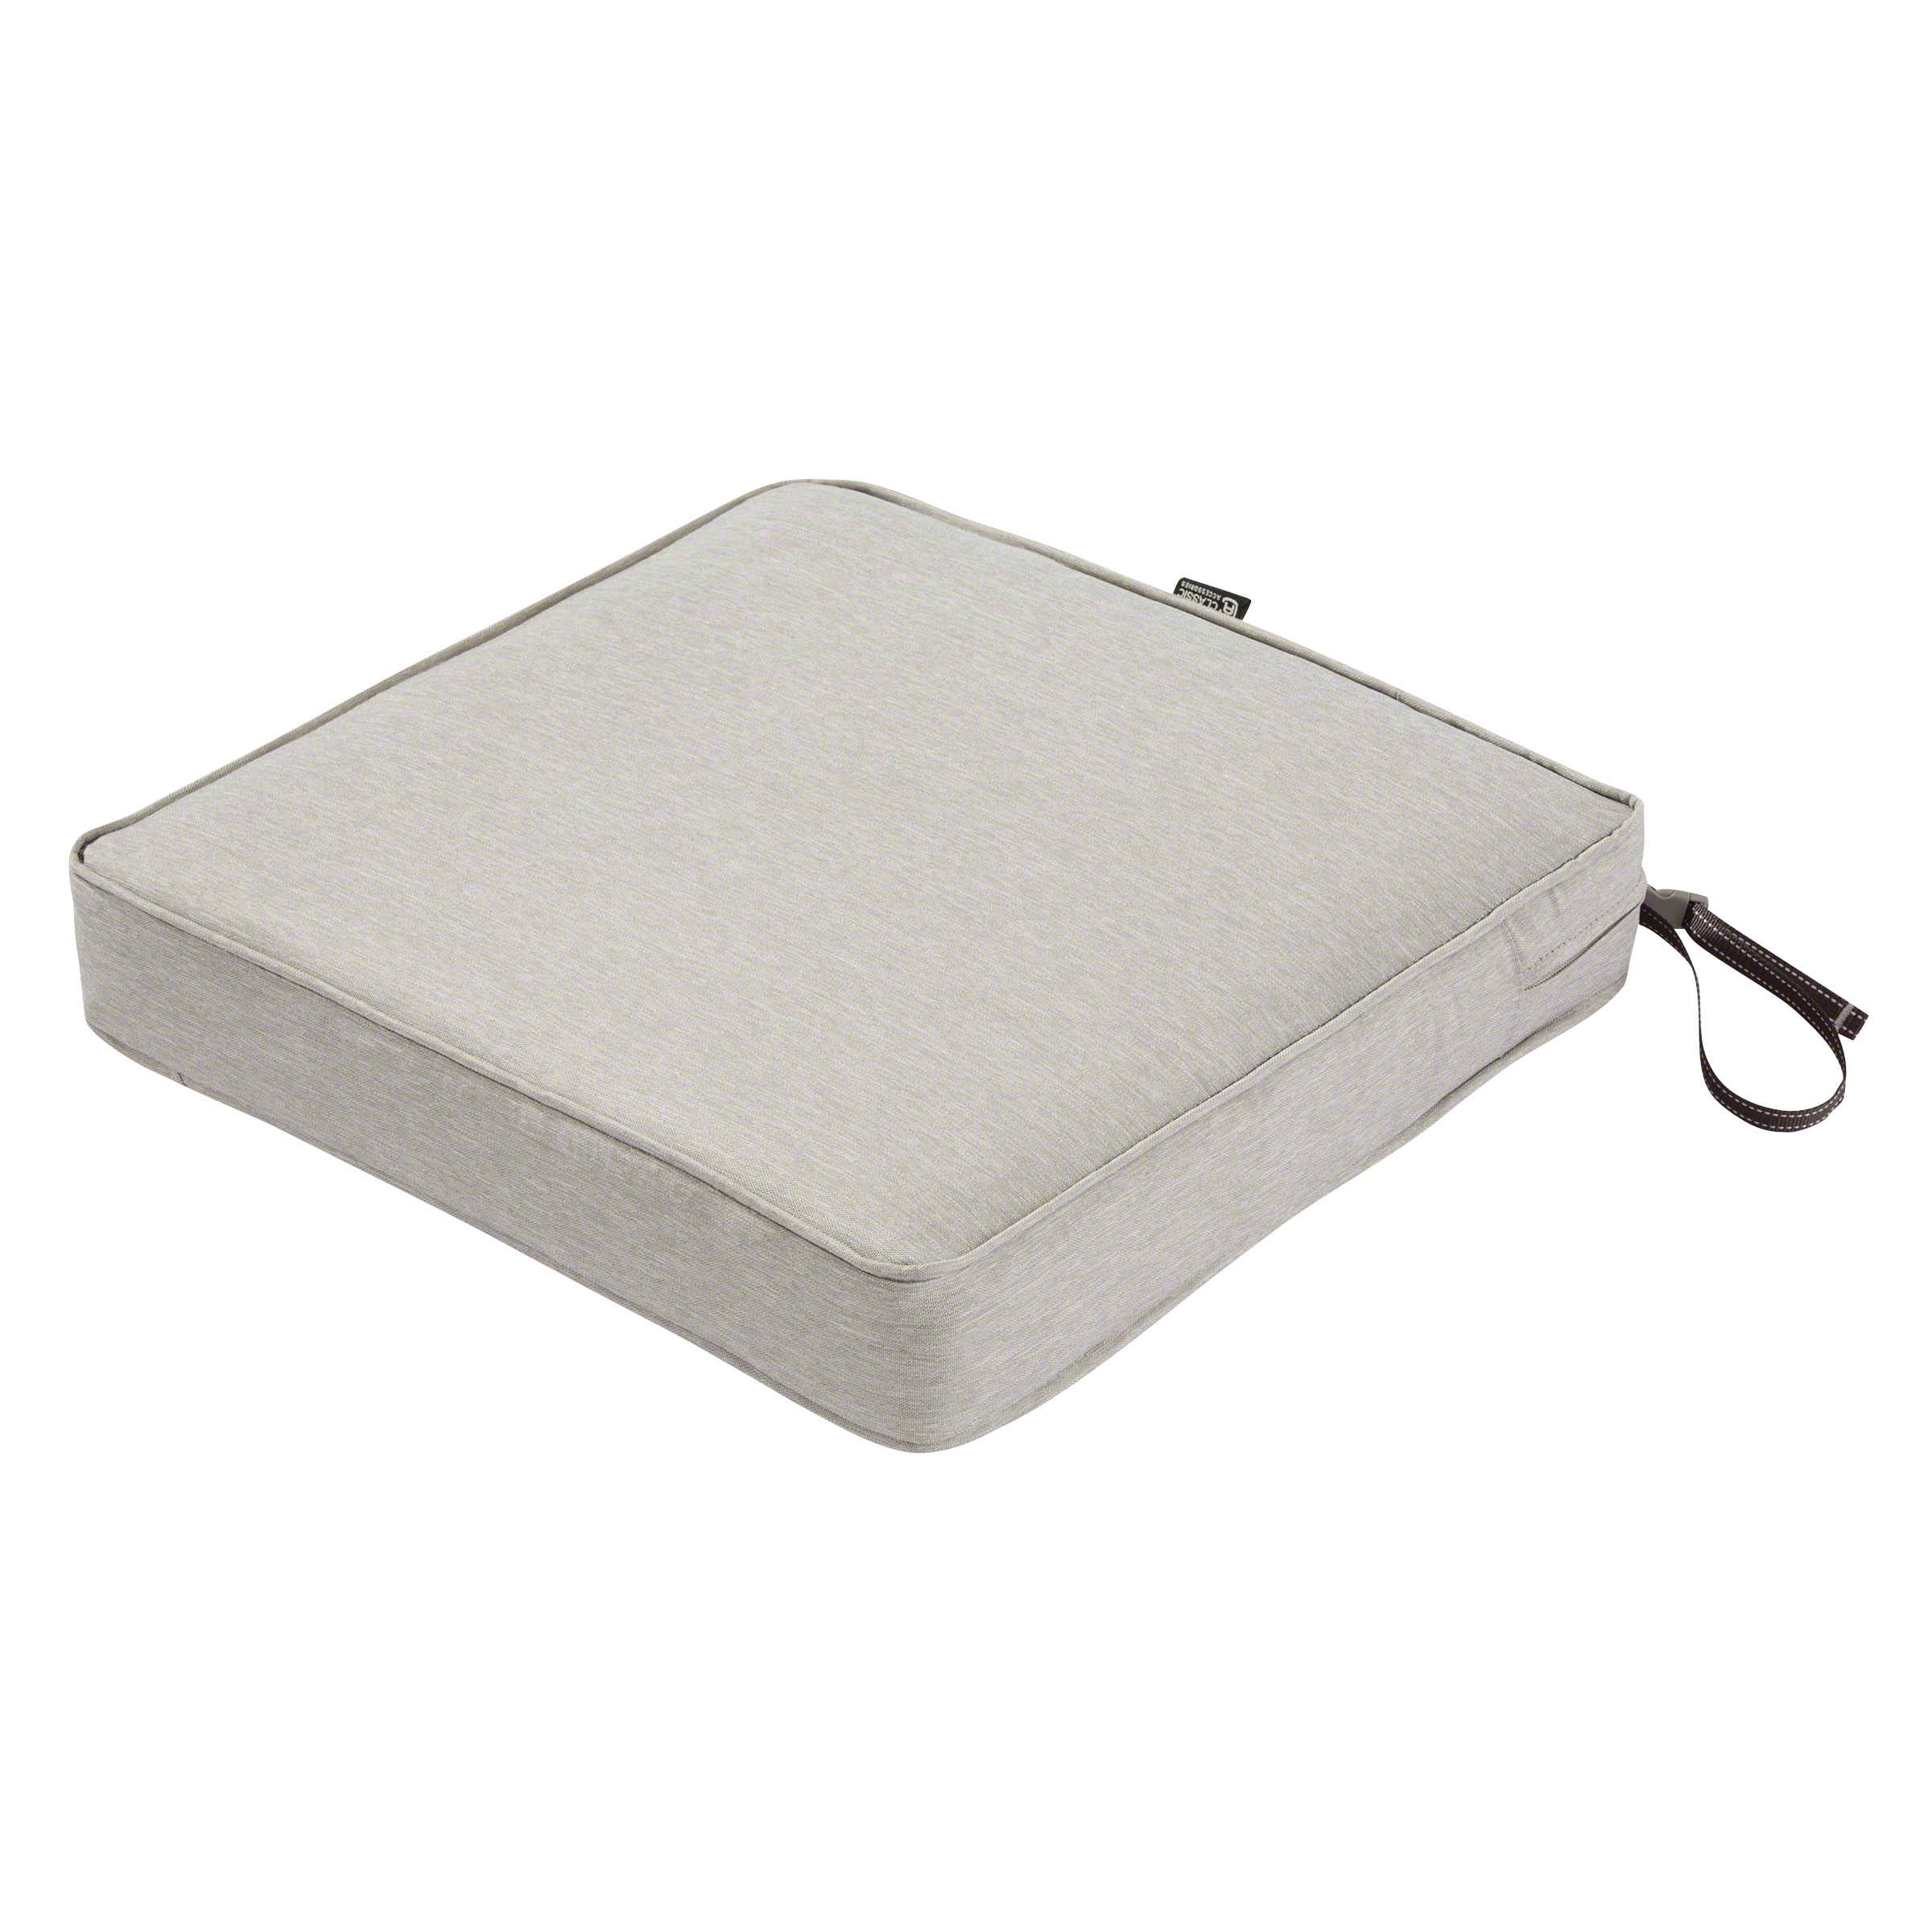 Classic Accessories Square Patio Dining Seat Cushion, Heather Gray, 21"x21"x3"